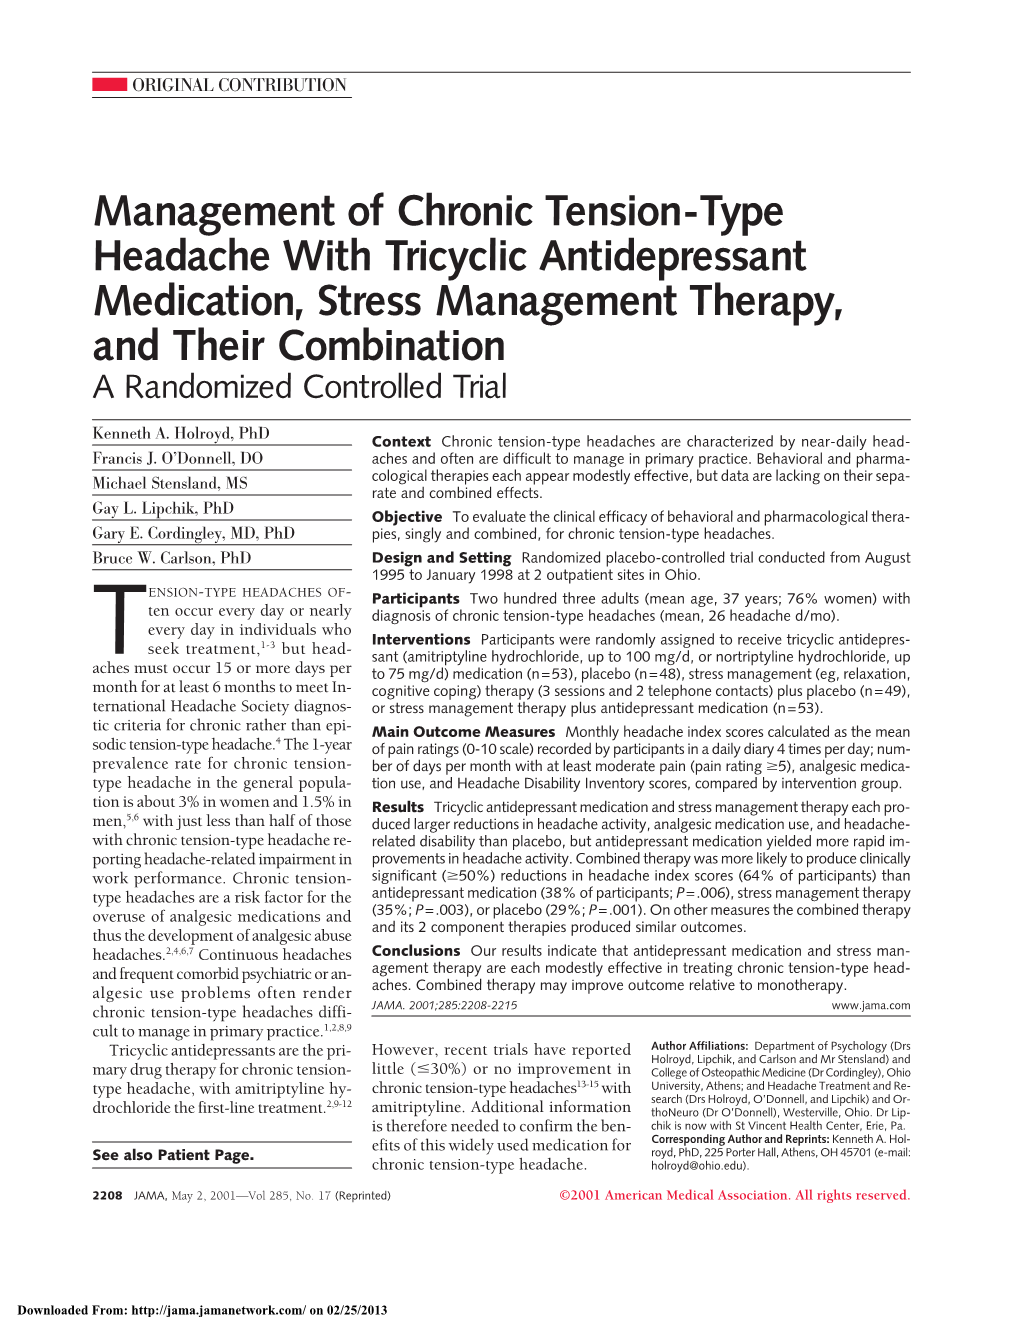 Management of Chronic Tension-Type Headache with Tricyclic Antidepressant Medication, Stress Management Therapy, and Their Combination a Randomized Controlled Trial